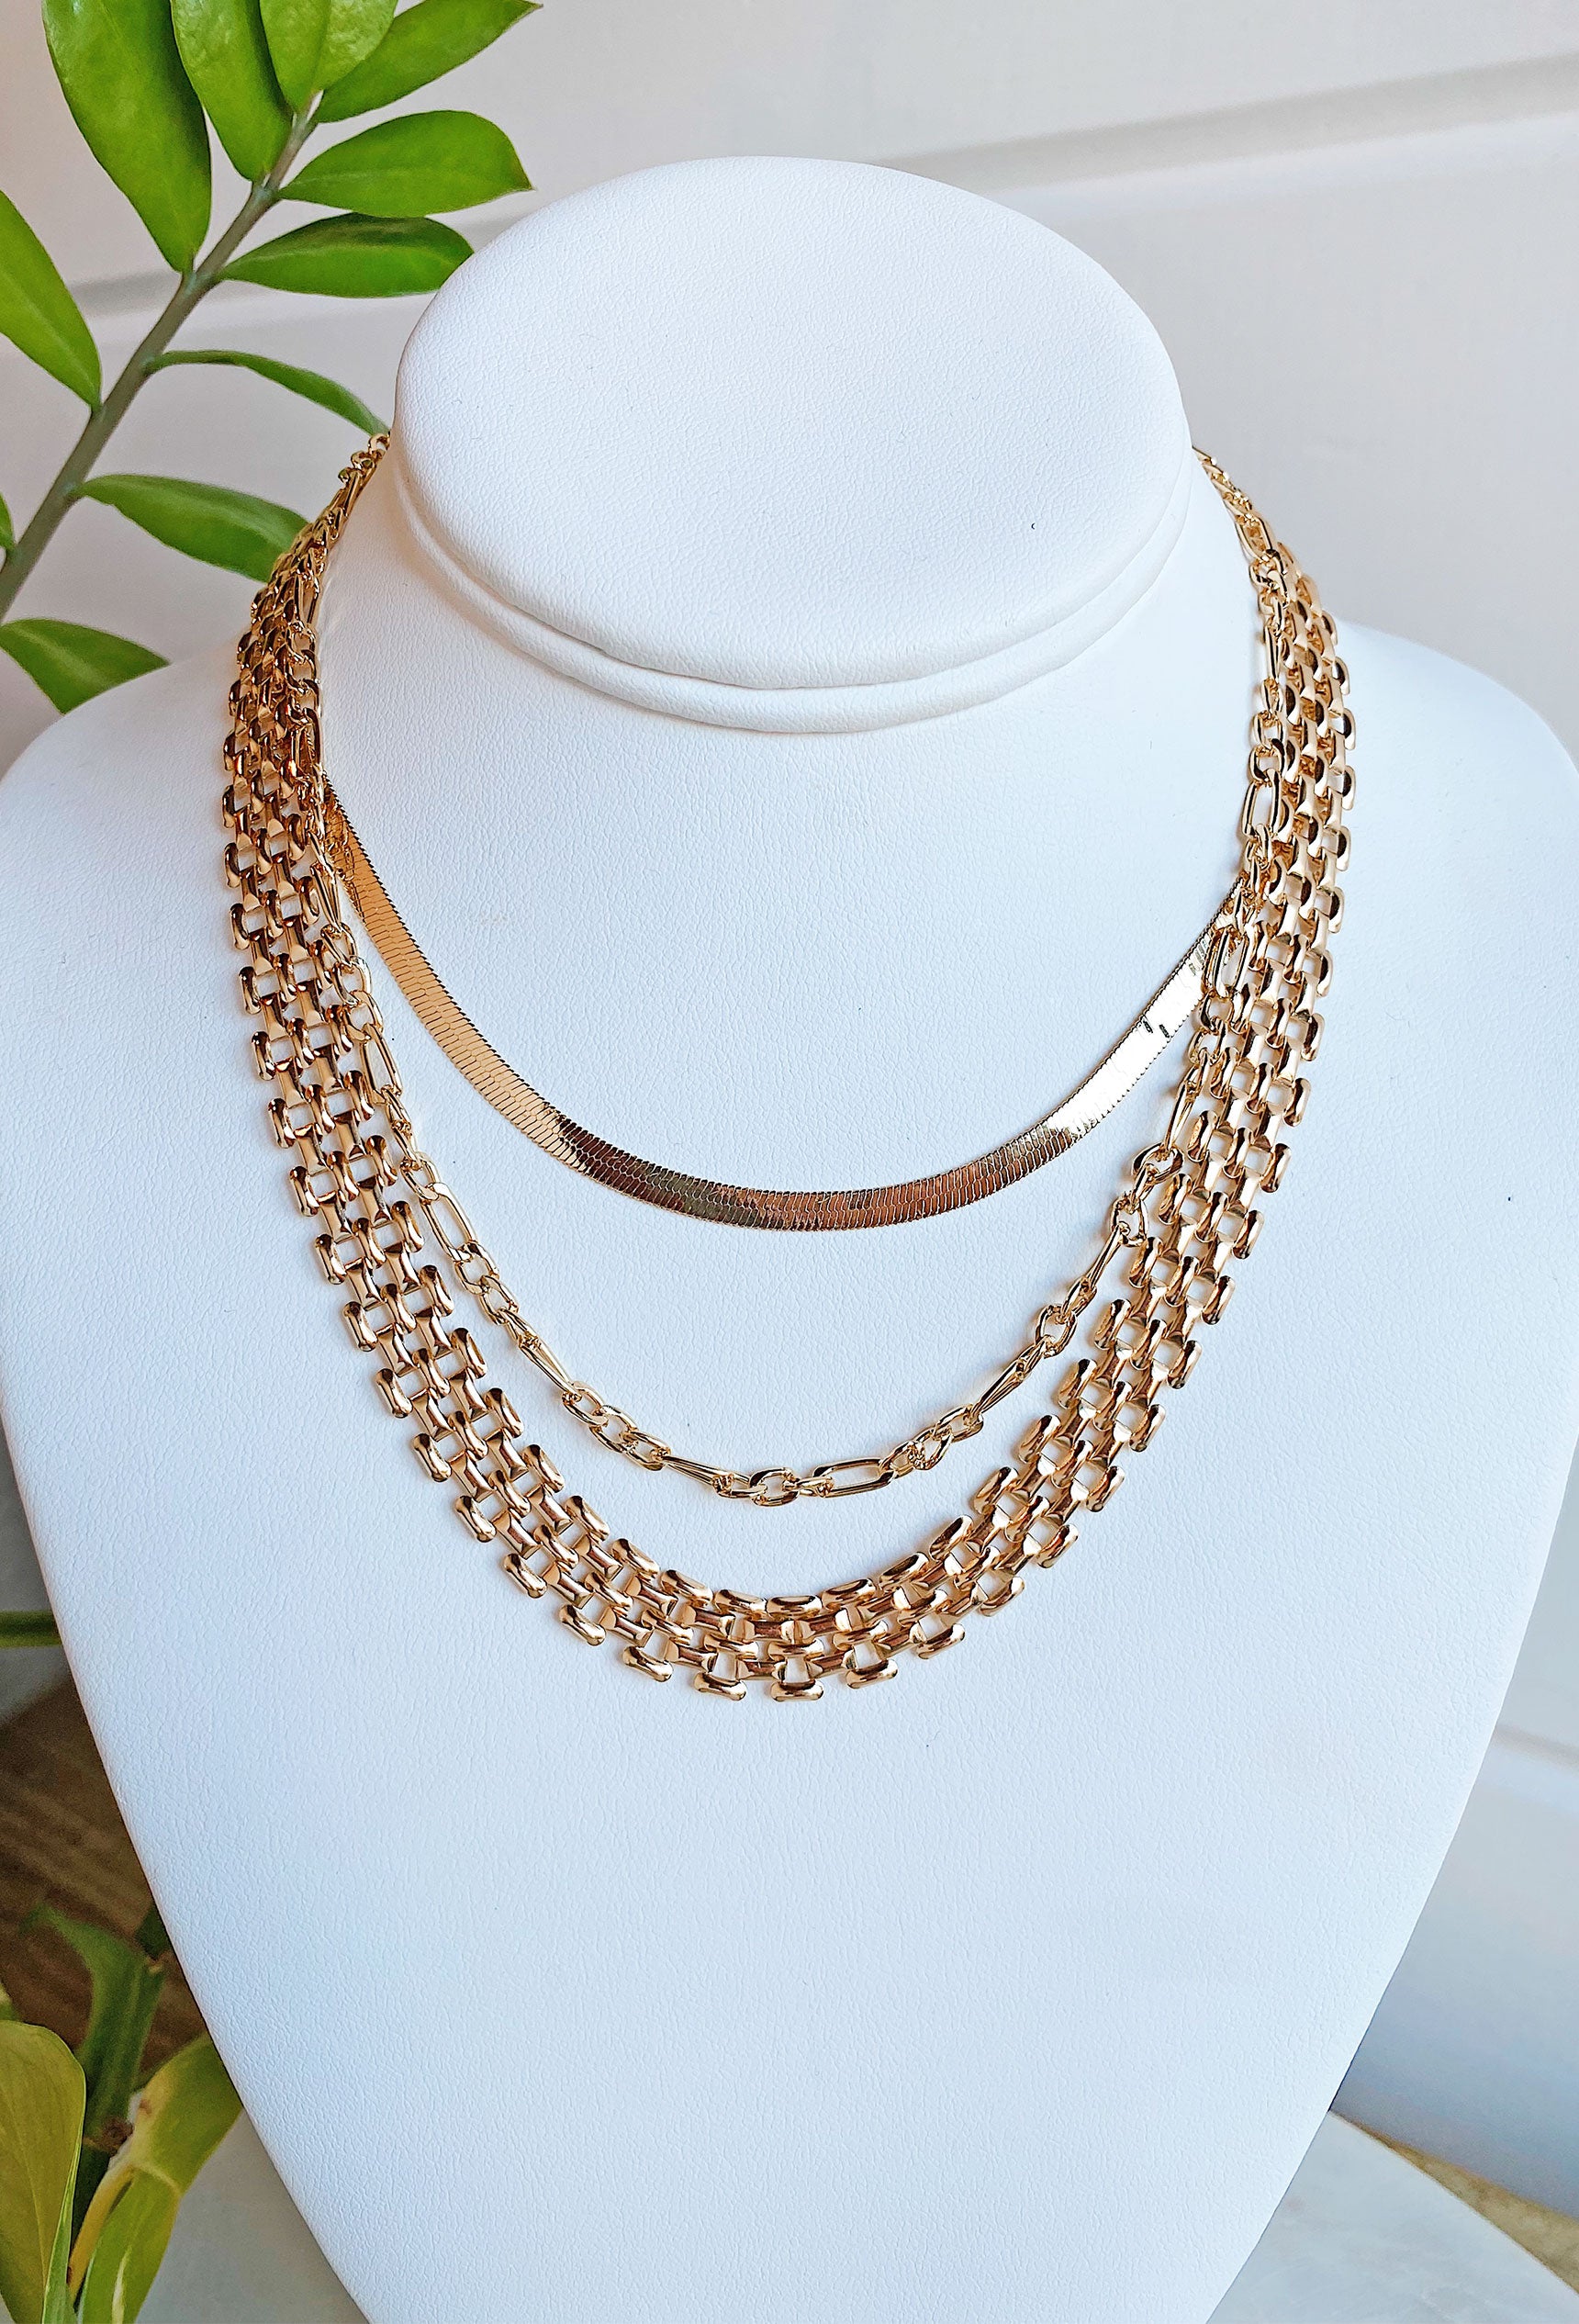 18K Gold Plated Beads Double Layer Chain Necklace GOLDEN | Layered chain  necklace, Chain necklace, Necklace